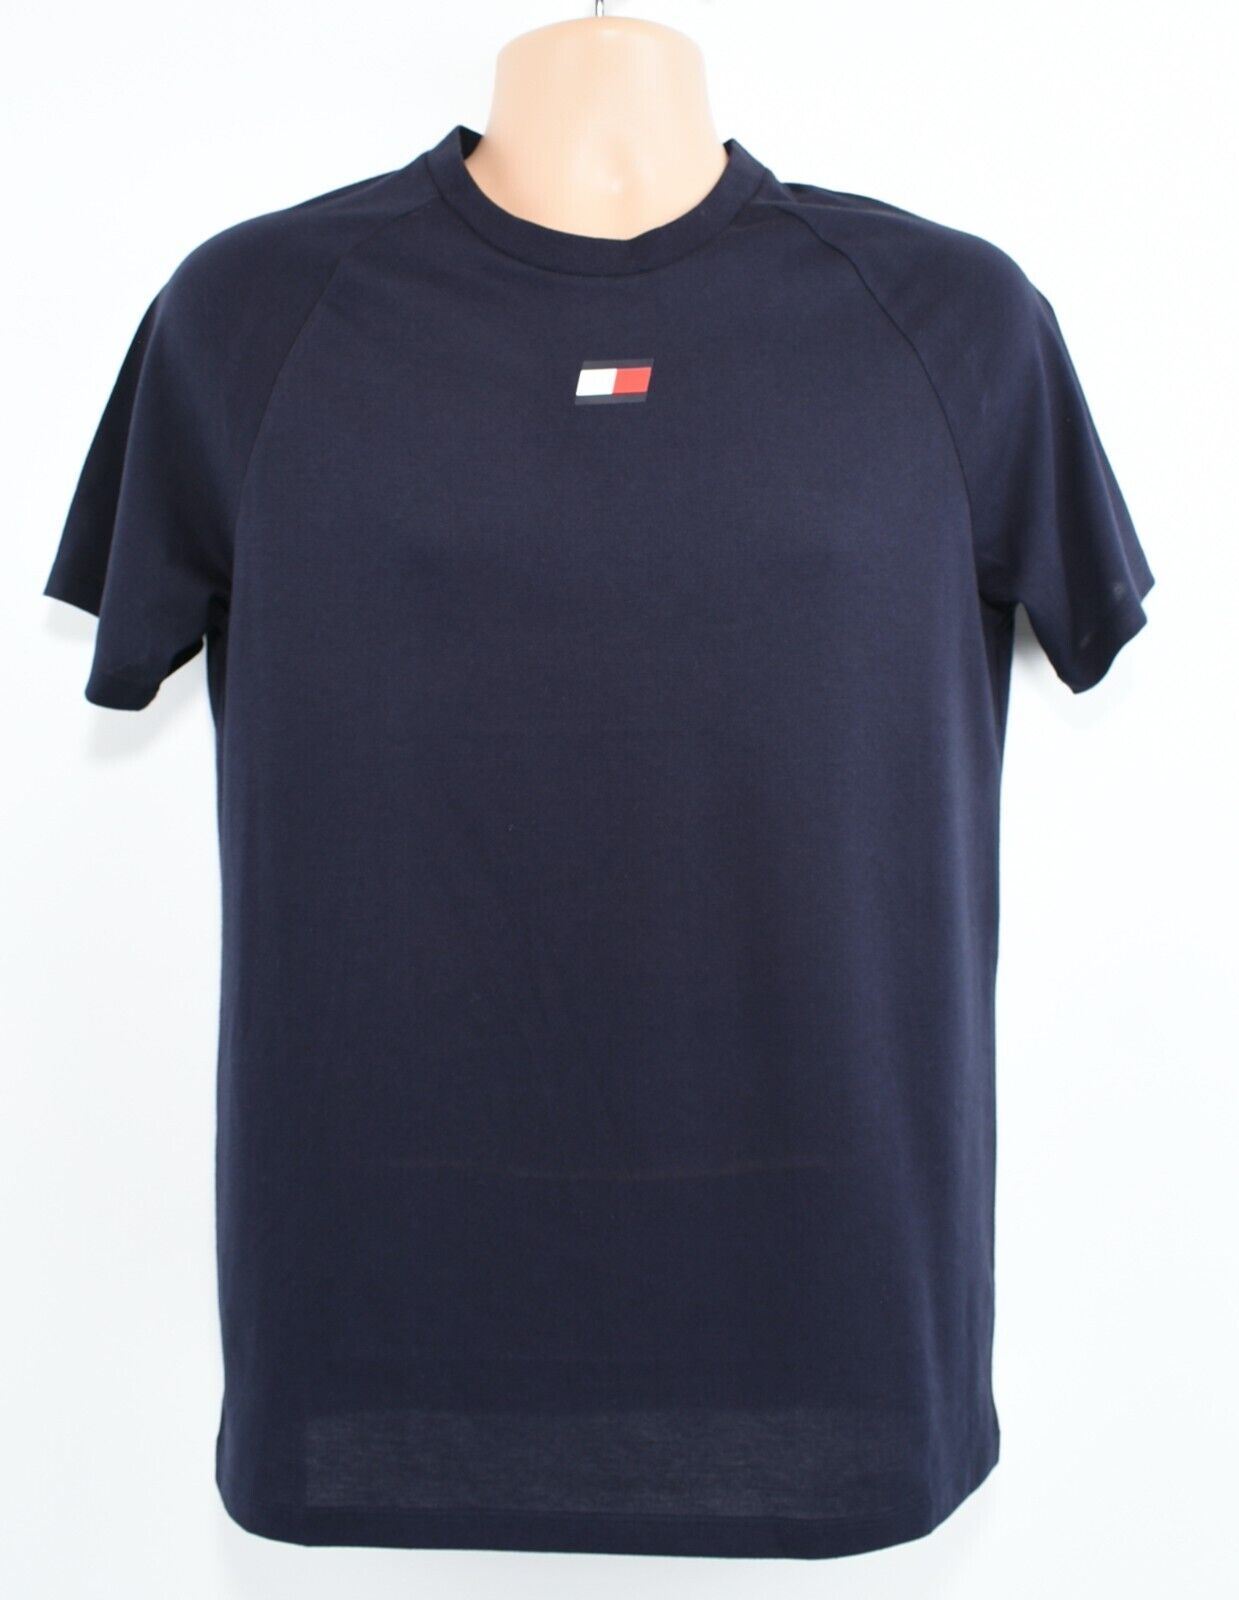 TOMMY HILFIGER - TOMMY SPORT Men's Chest Logo T-shirt, Blue, size SMALL